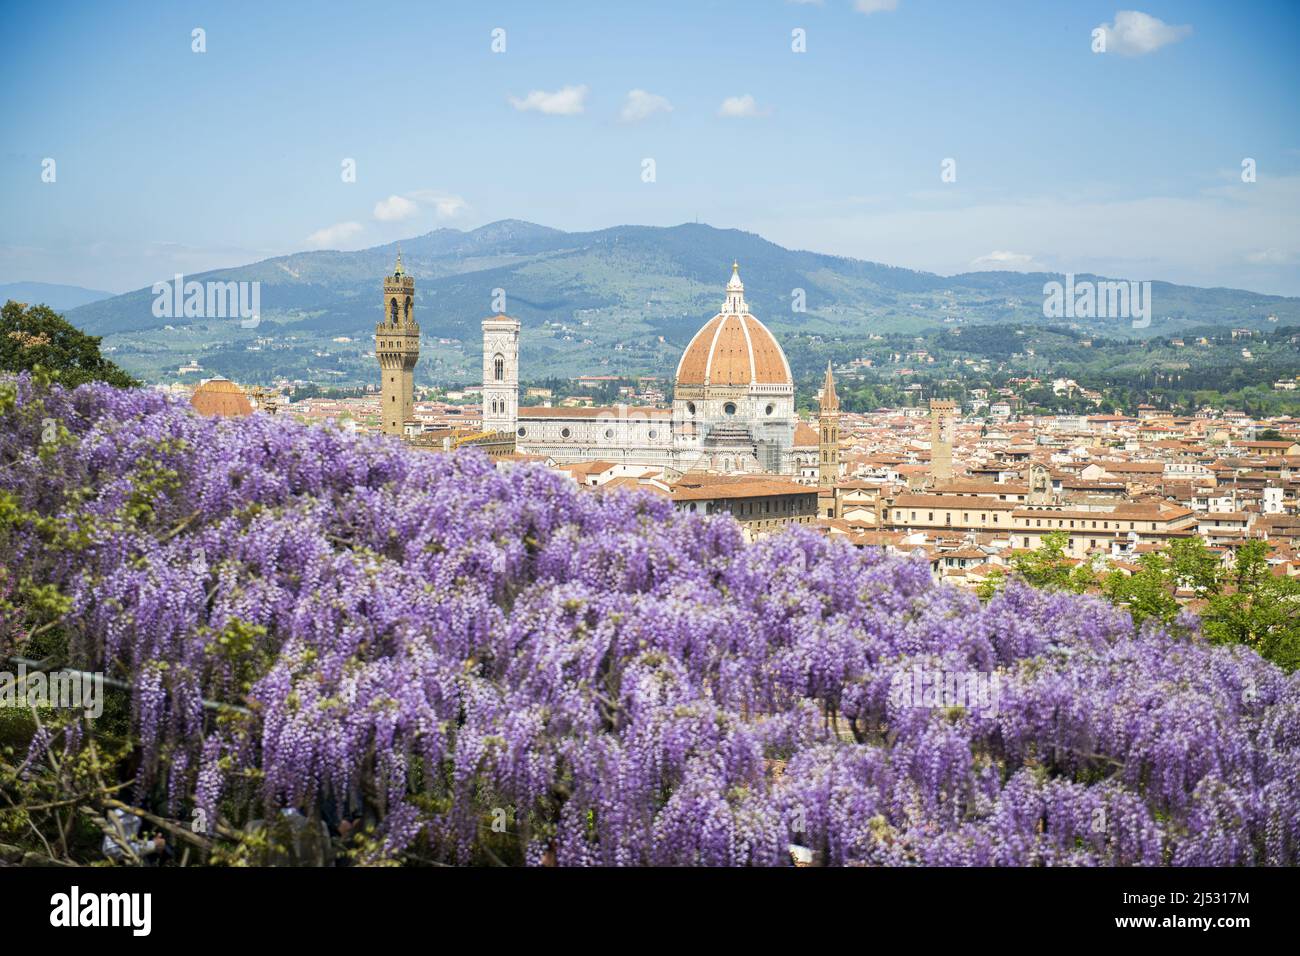 Florence, Tuscany. Panorama of Florence with Palazzo della Signoria and Brunelleschi's dome in the foreground. The beautiful wisteria is the setting. Stock Photo